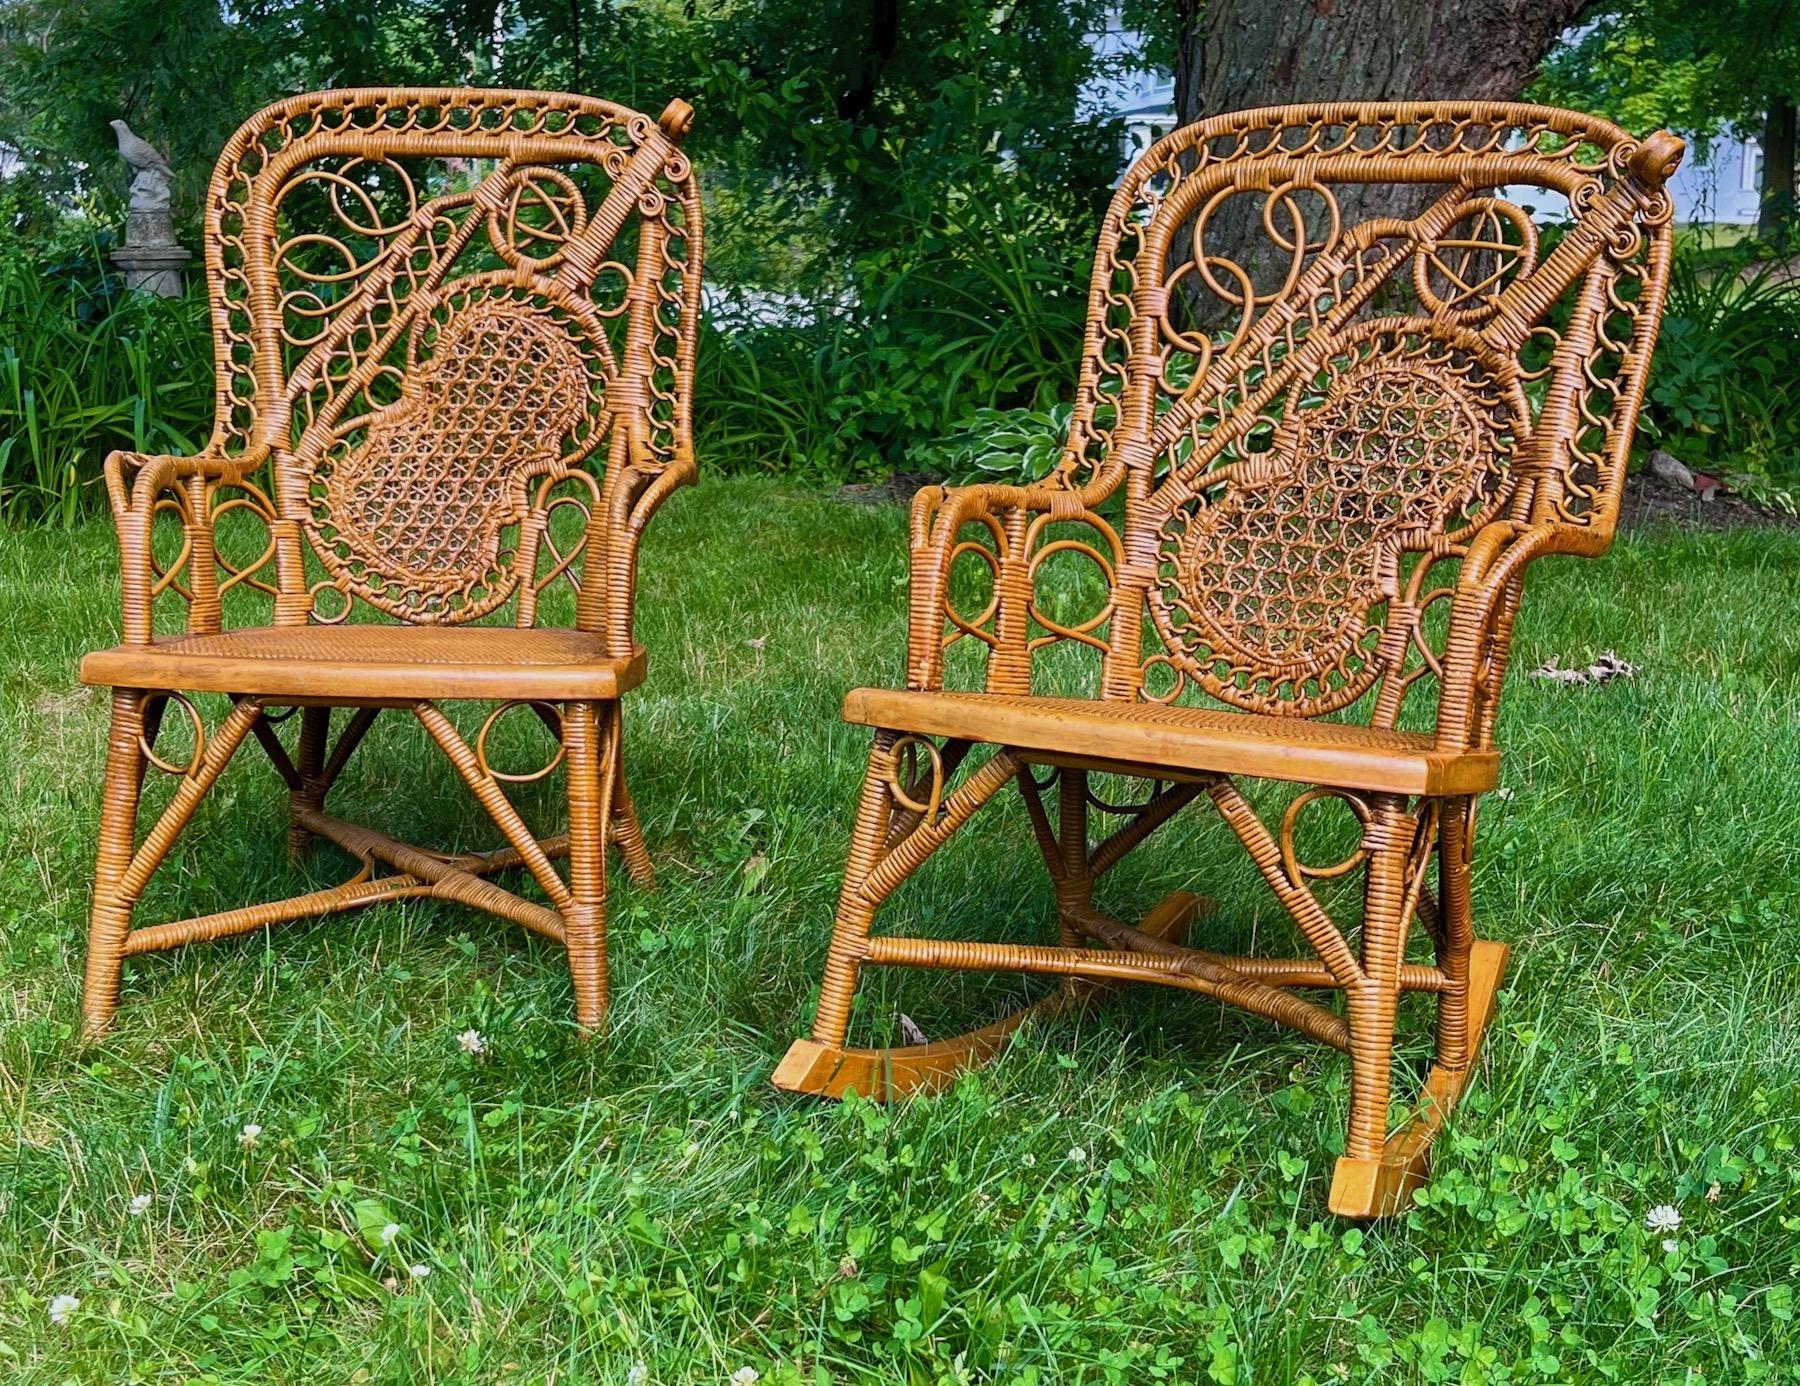 A very rare early matching pair of wicker Childs chair and rocker by the Wakefield Rattan Company, Wakefield Massachusetts, C. 1890s in wonderful condition. This  matching set consists of children's matching rocker and straight chair often referred